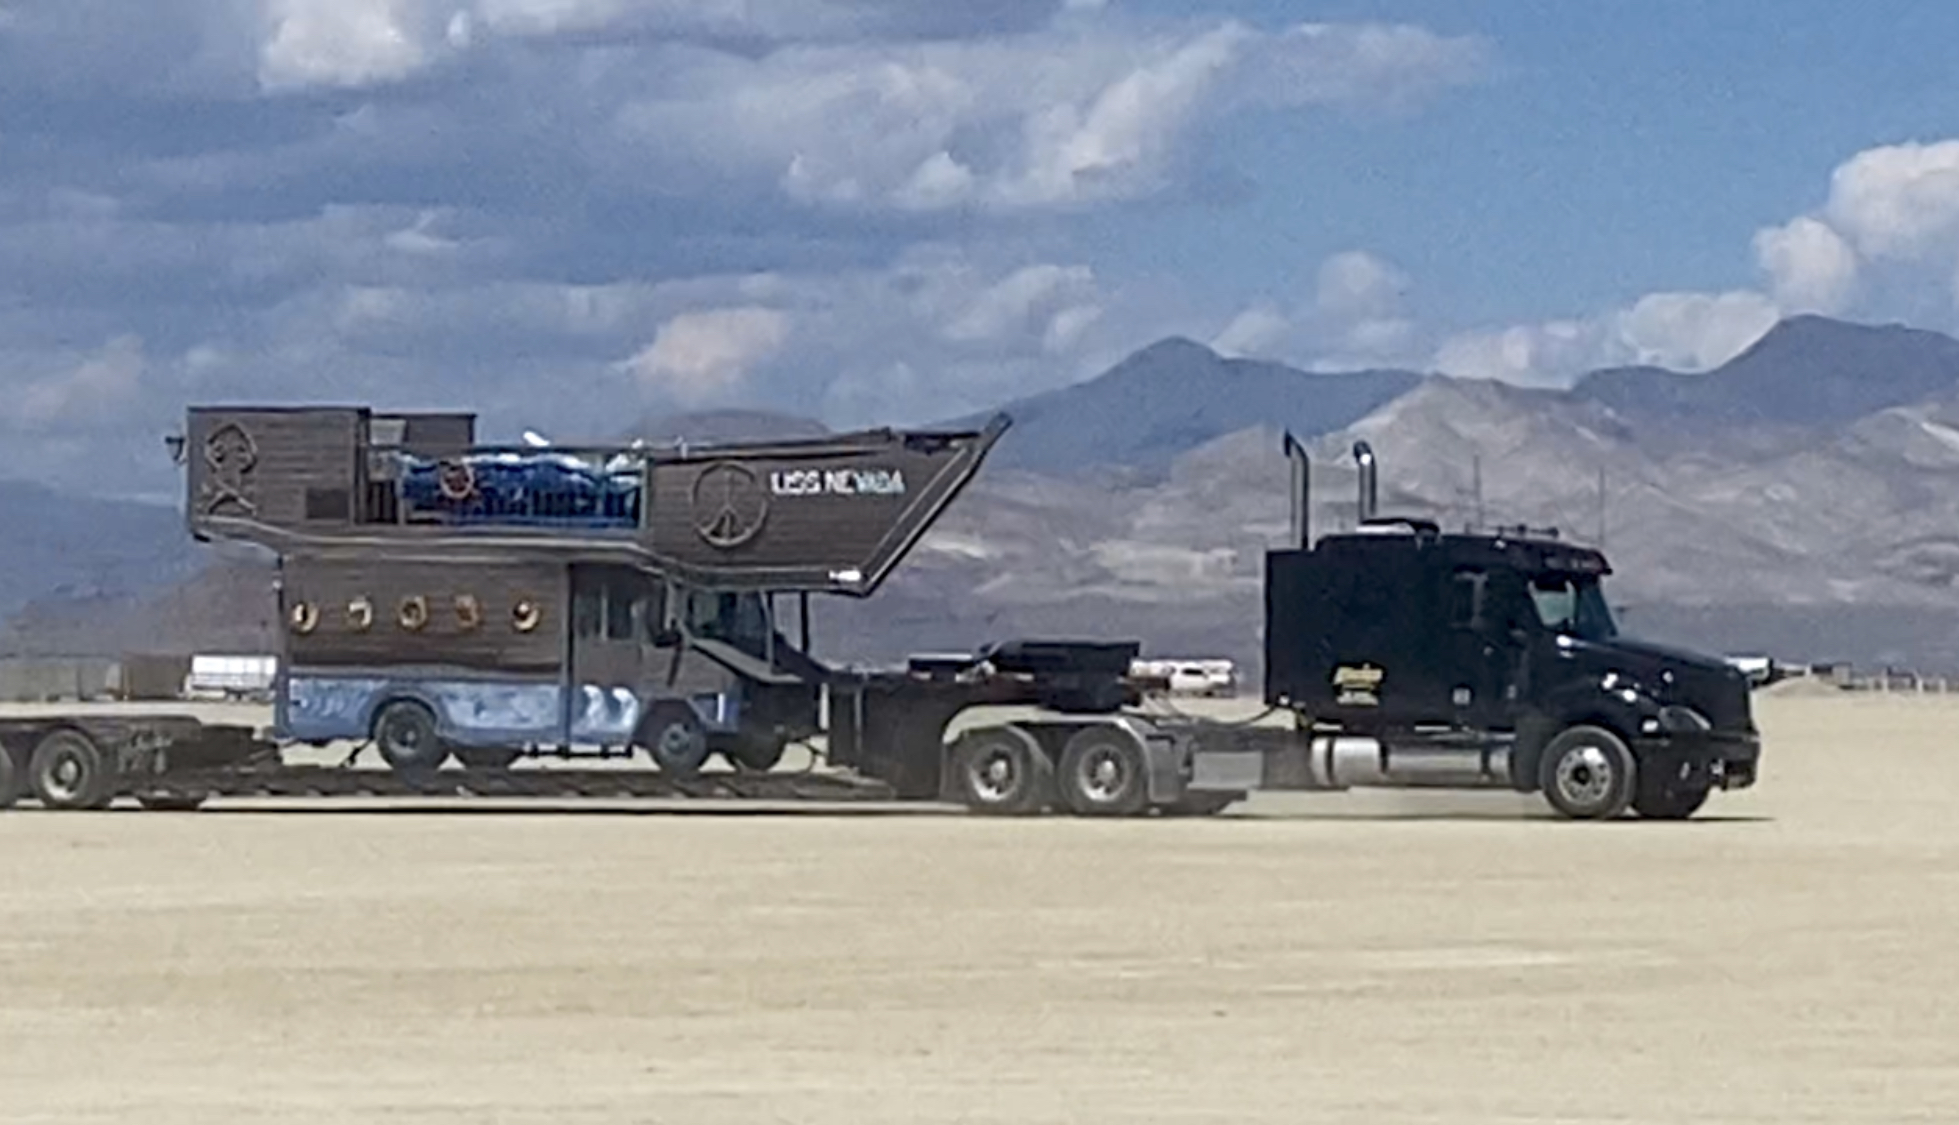 A truck driver hauls the base for the Gallavant camp’s USS Nevada pirate ship into Black Rock City on Aug. 25, 2023 as part of Burning Man 2023.